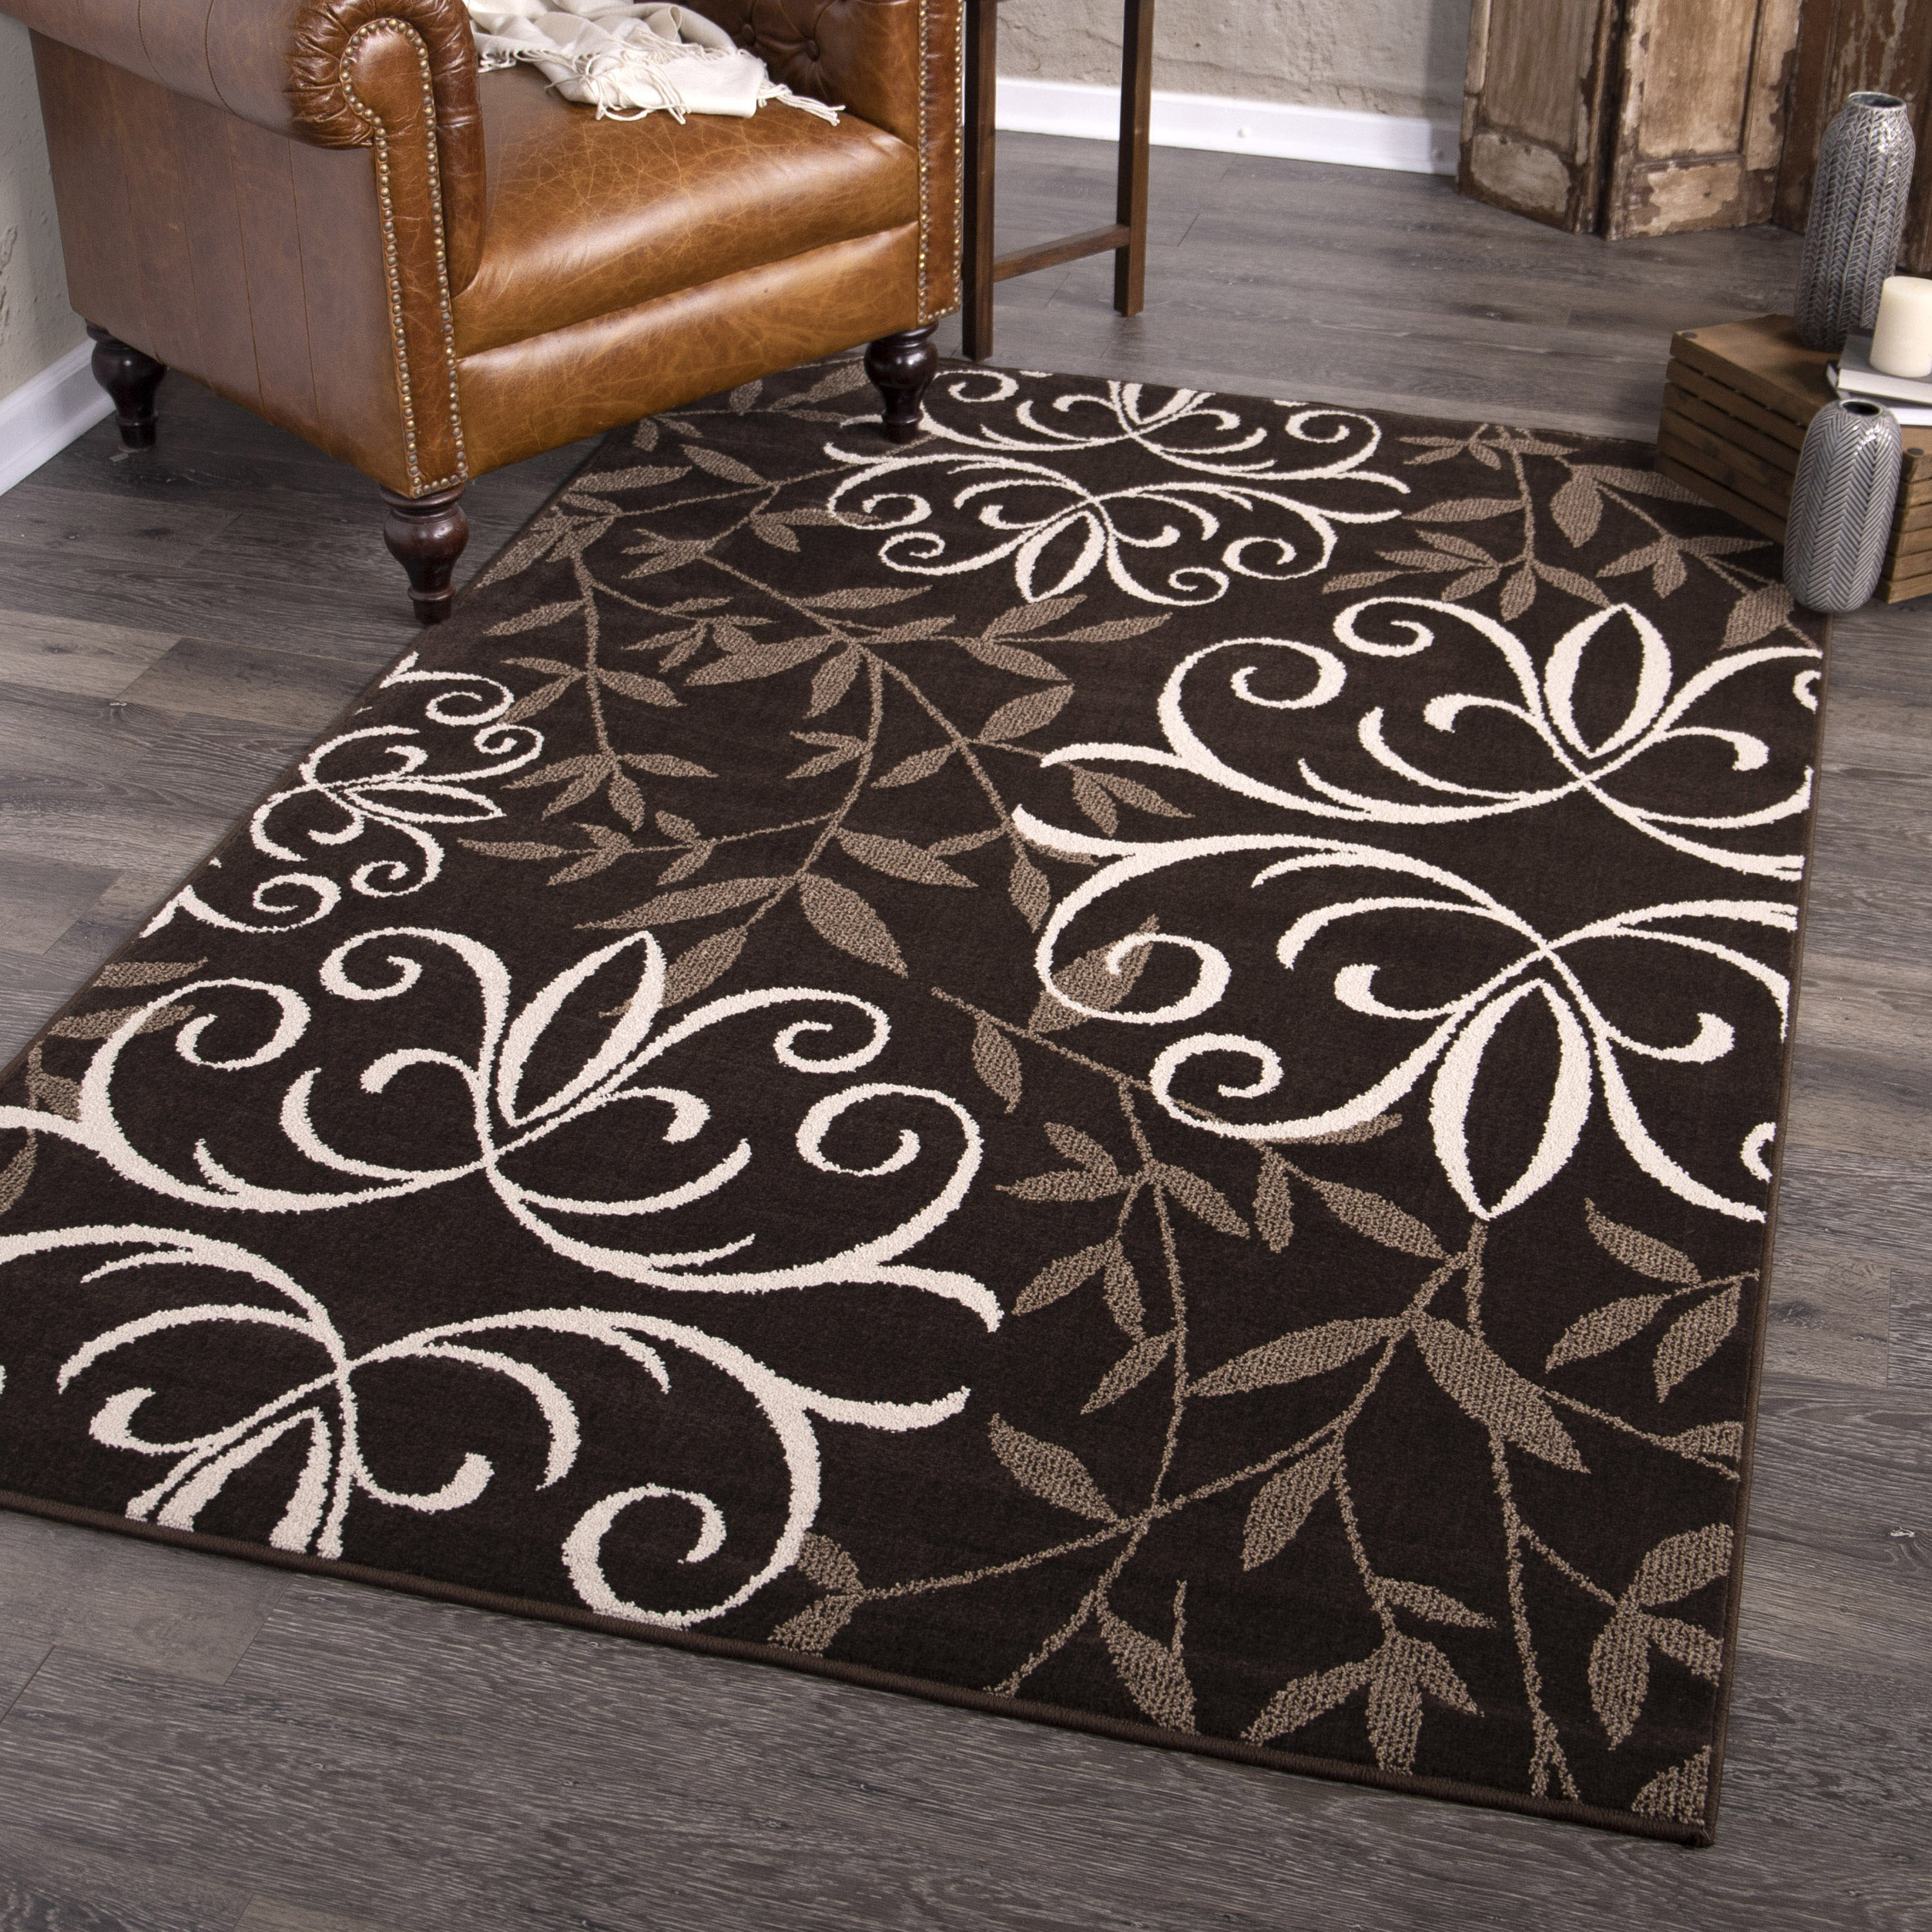 Better Homes & Gardens Iron Fleur Area Rug, Brown, 7'10" x 10'10" - image 1 of 10